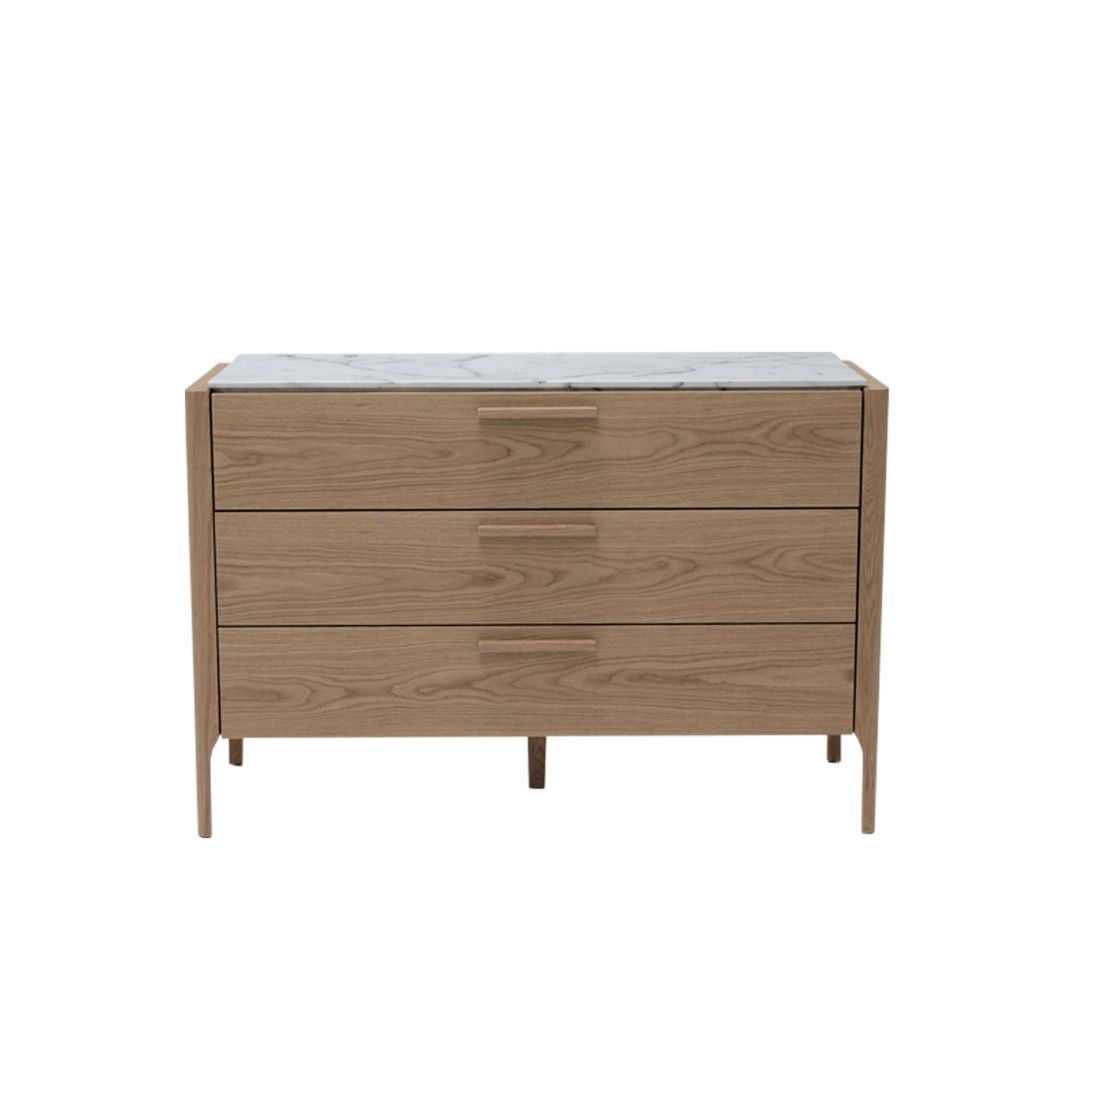 19203162-winshi-furniture-living-room-console-01